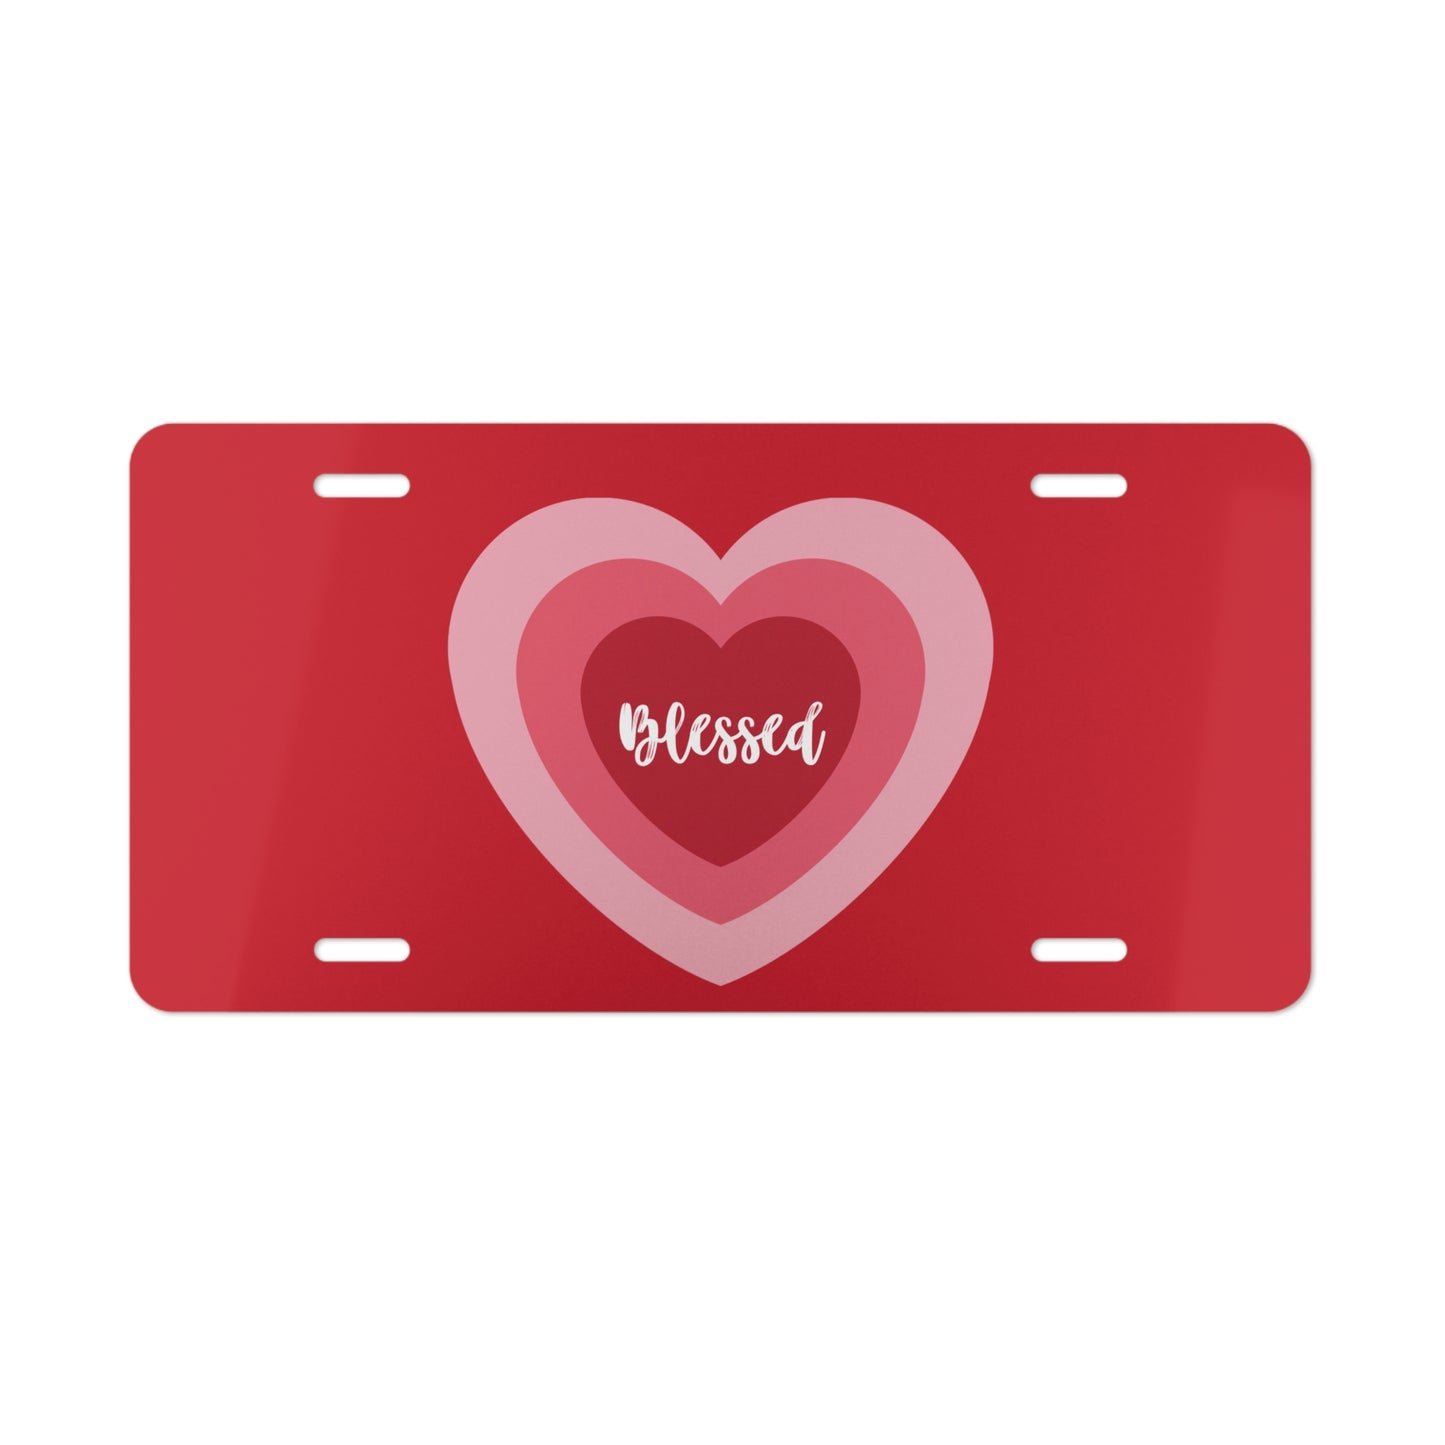 Blessed Heart License Plate - Red